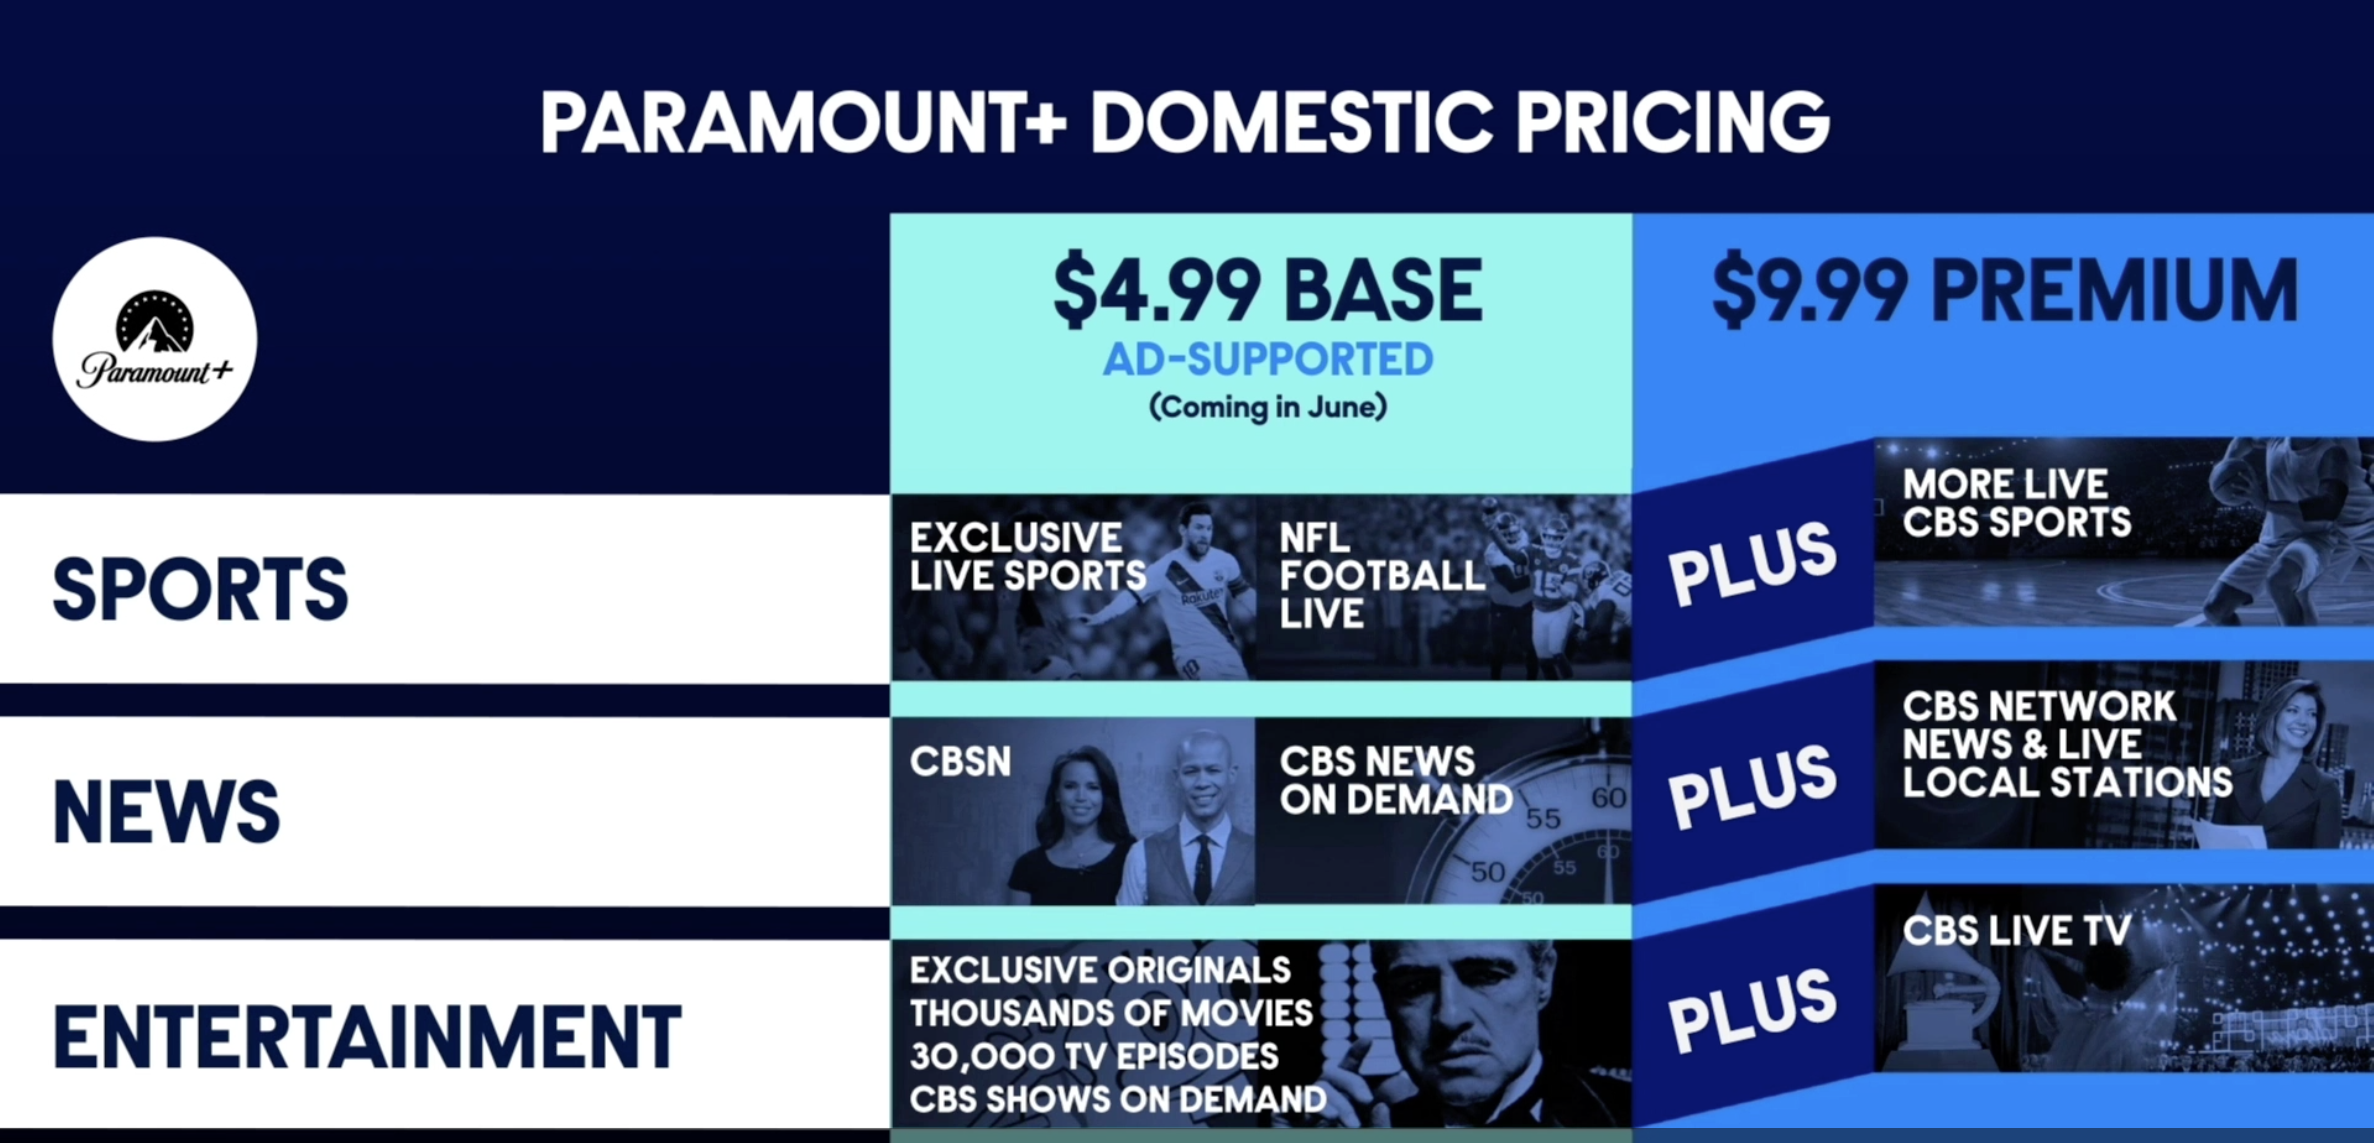 Paramount+ 6575M Subs by 2024; 4.99 and 9.99 Packages; Select Films